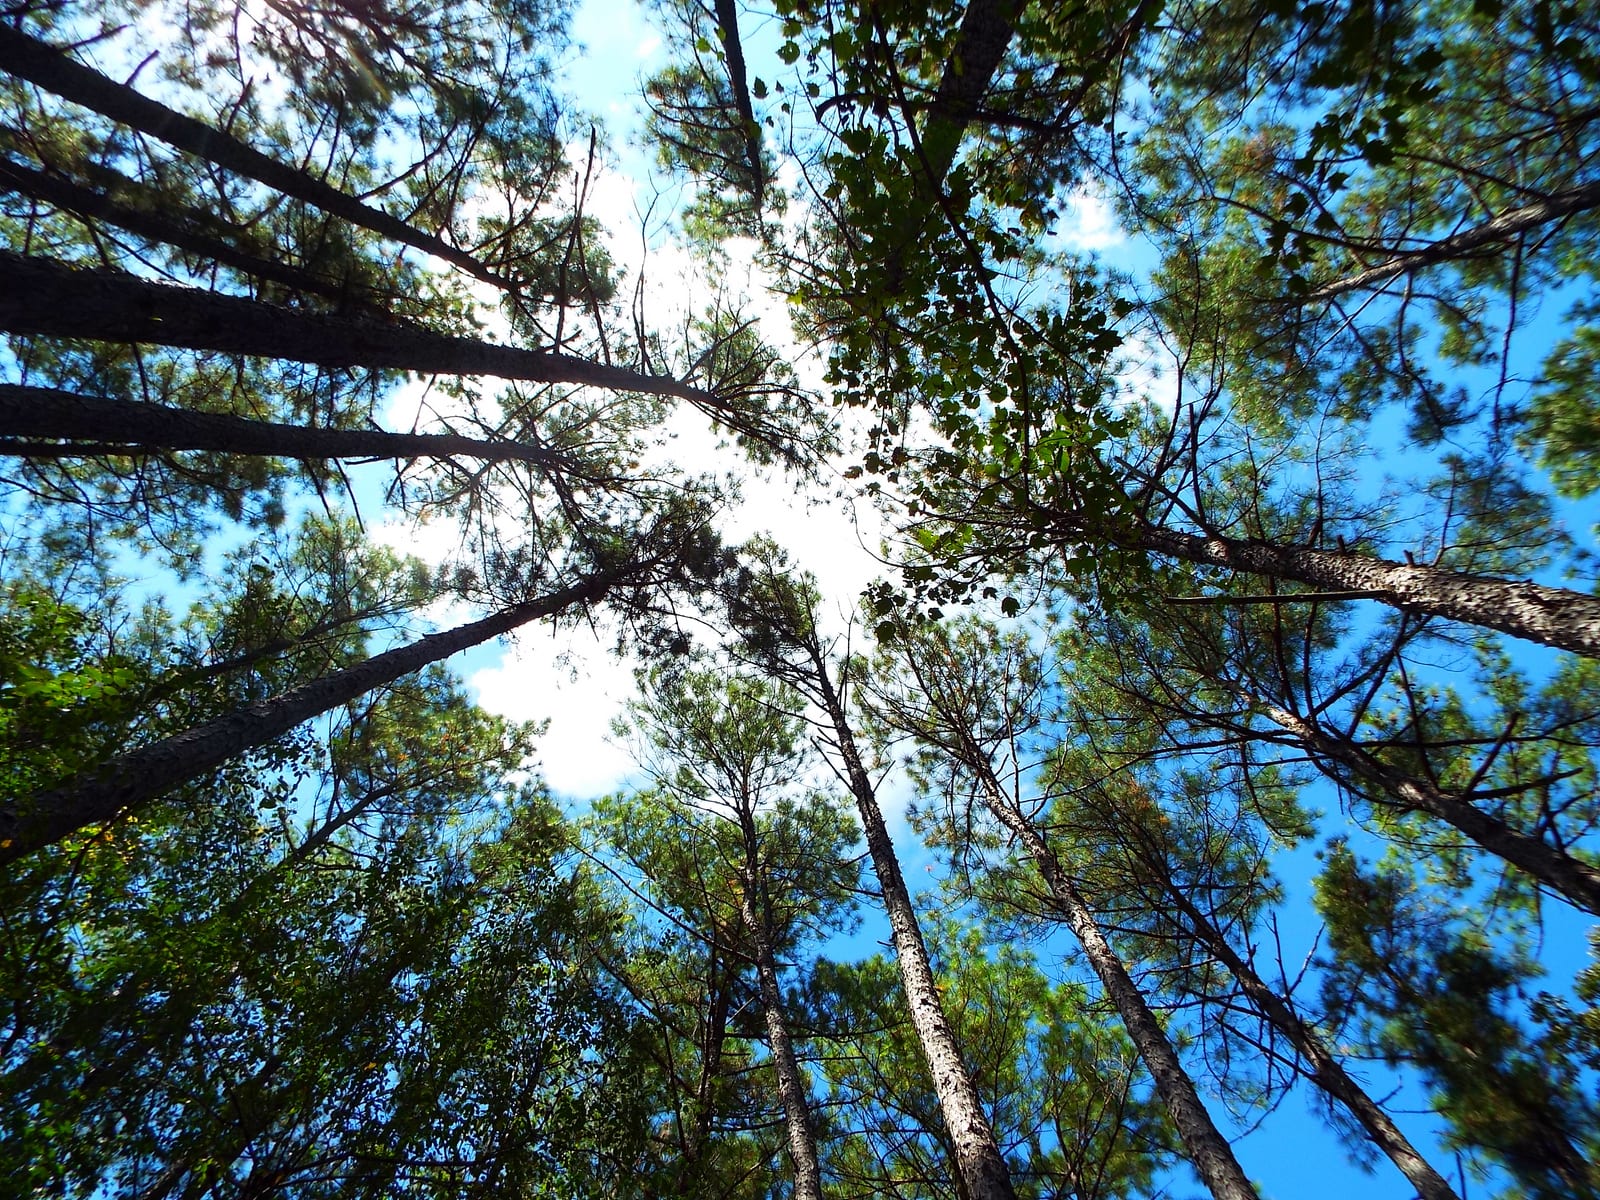 Looking up at the sky through converging Loblolly pine treetops.